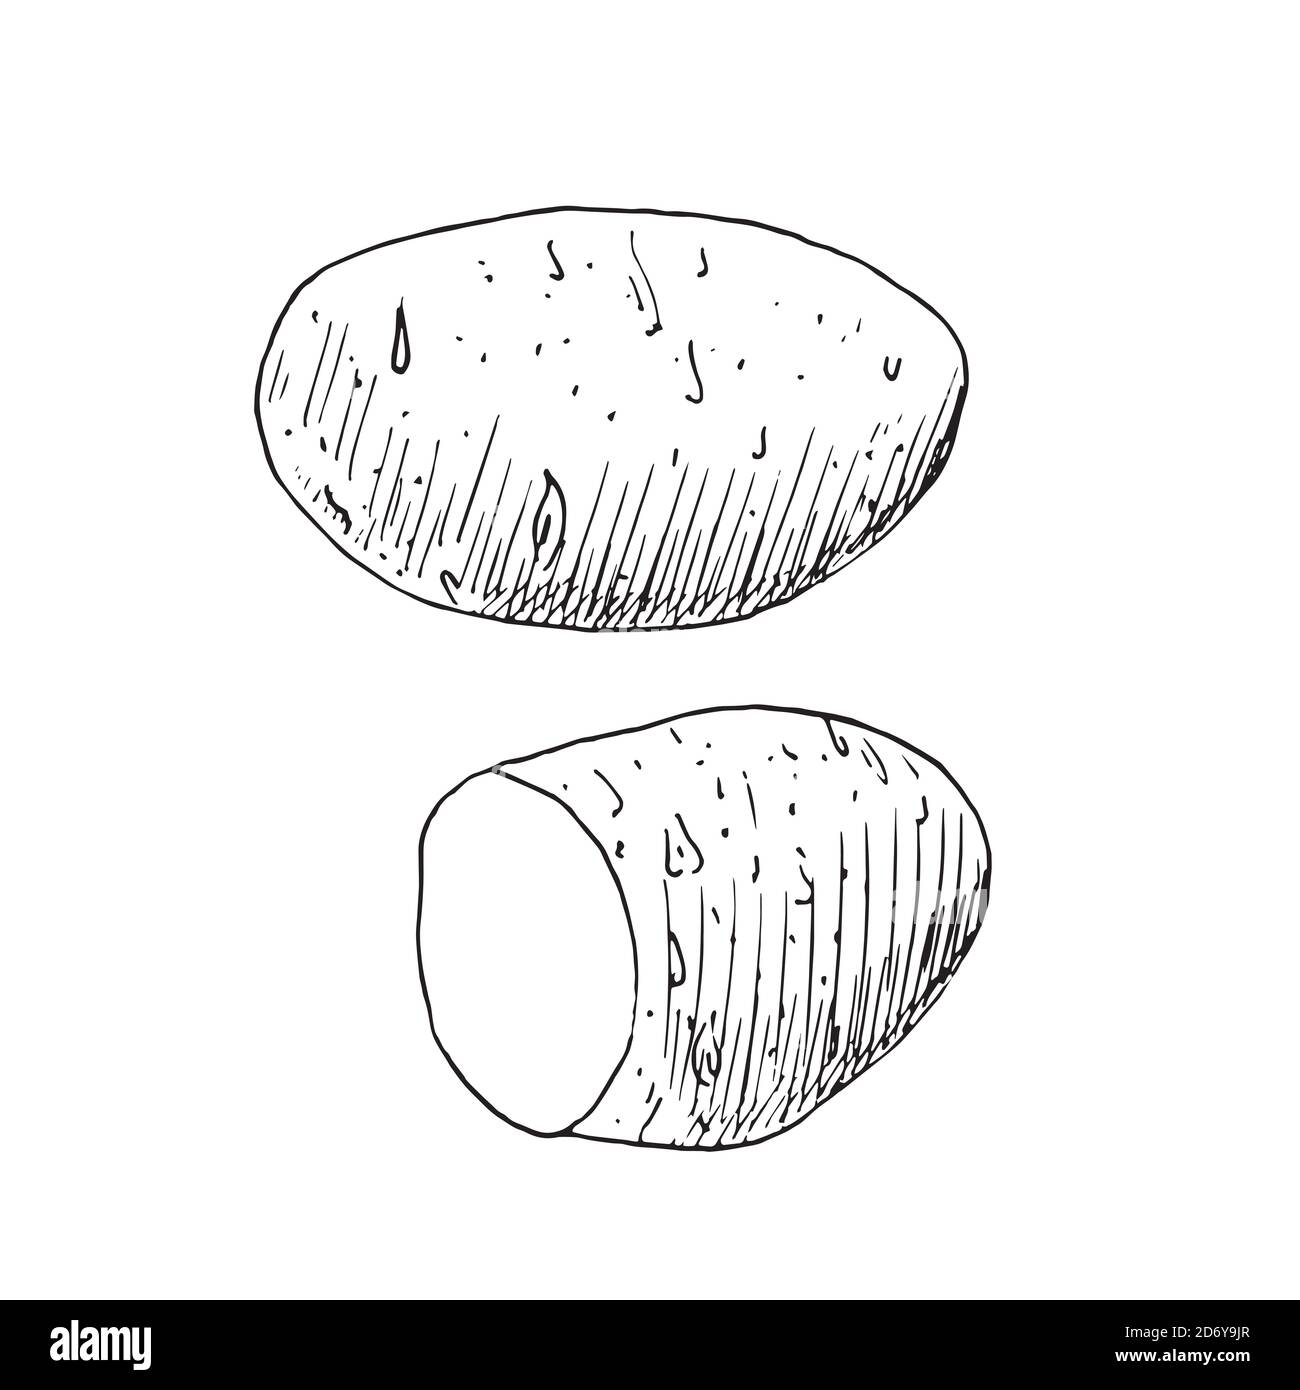 Potato drawing Cut Out Stock Images & Pictures - Alamy